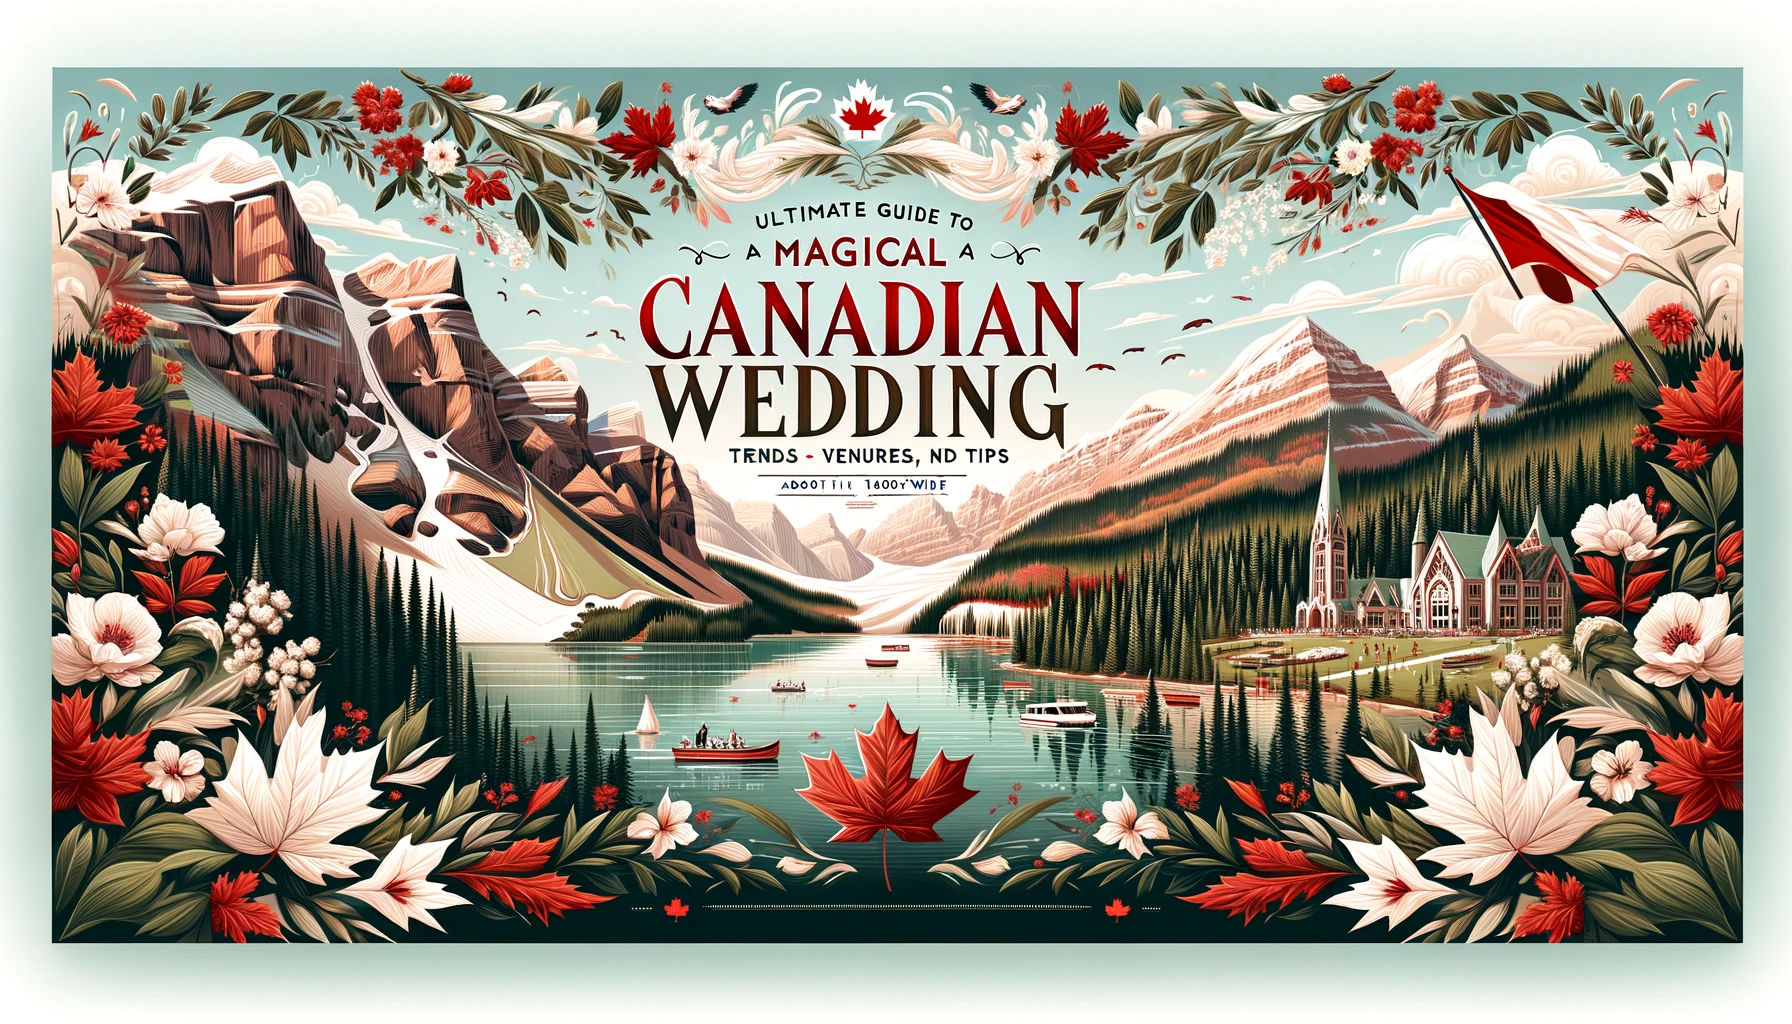 Ultimate Guide to a Magical Canadian Wedding: Trends, Venues, and Tips